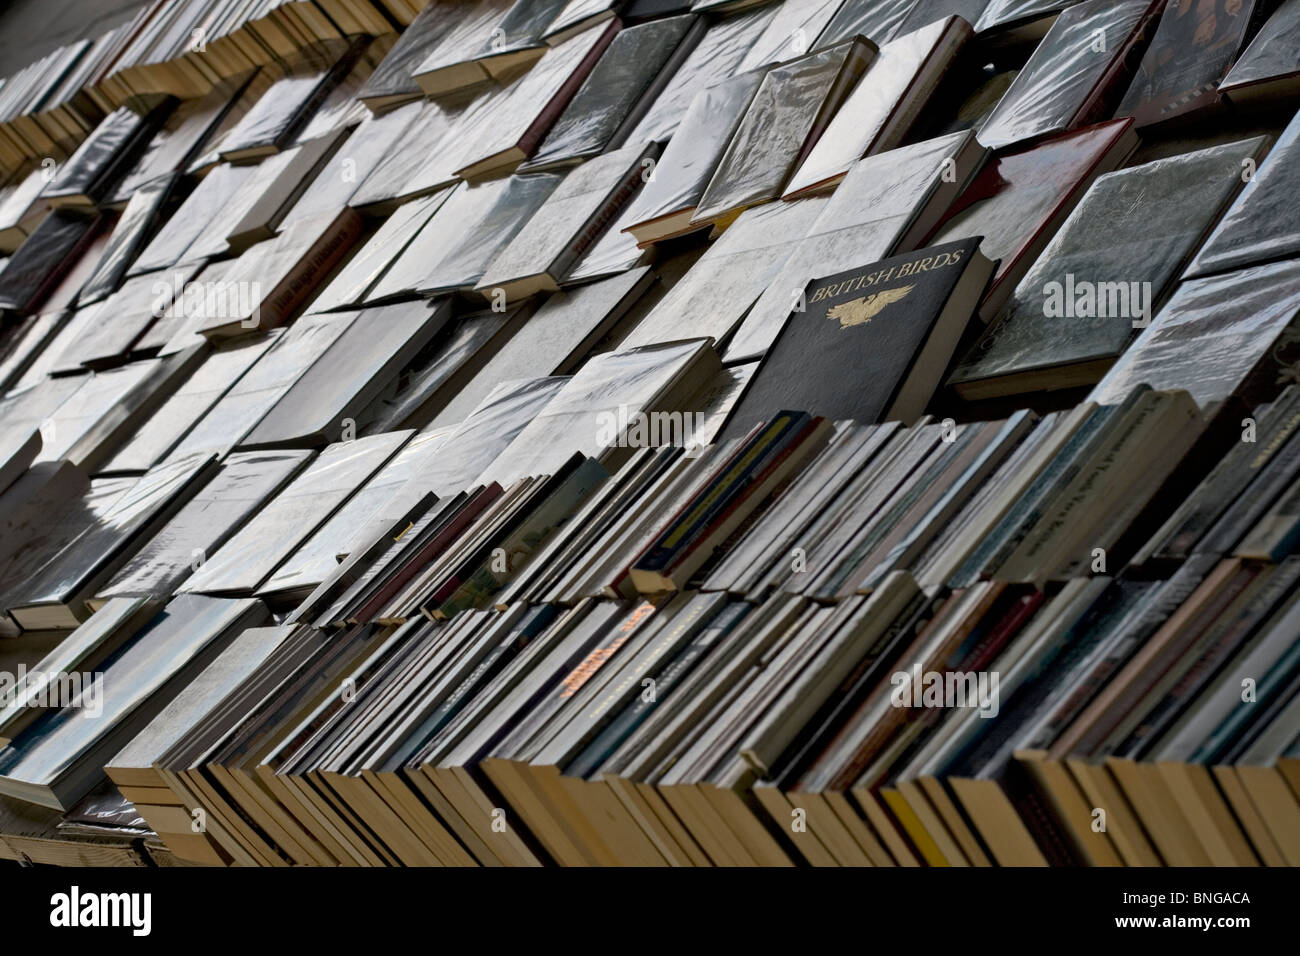 Second-hand books on a book stall on the South Bank of the River Thames, London, UK Stock Photo